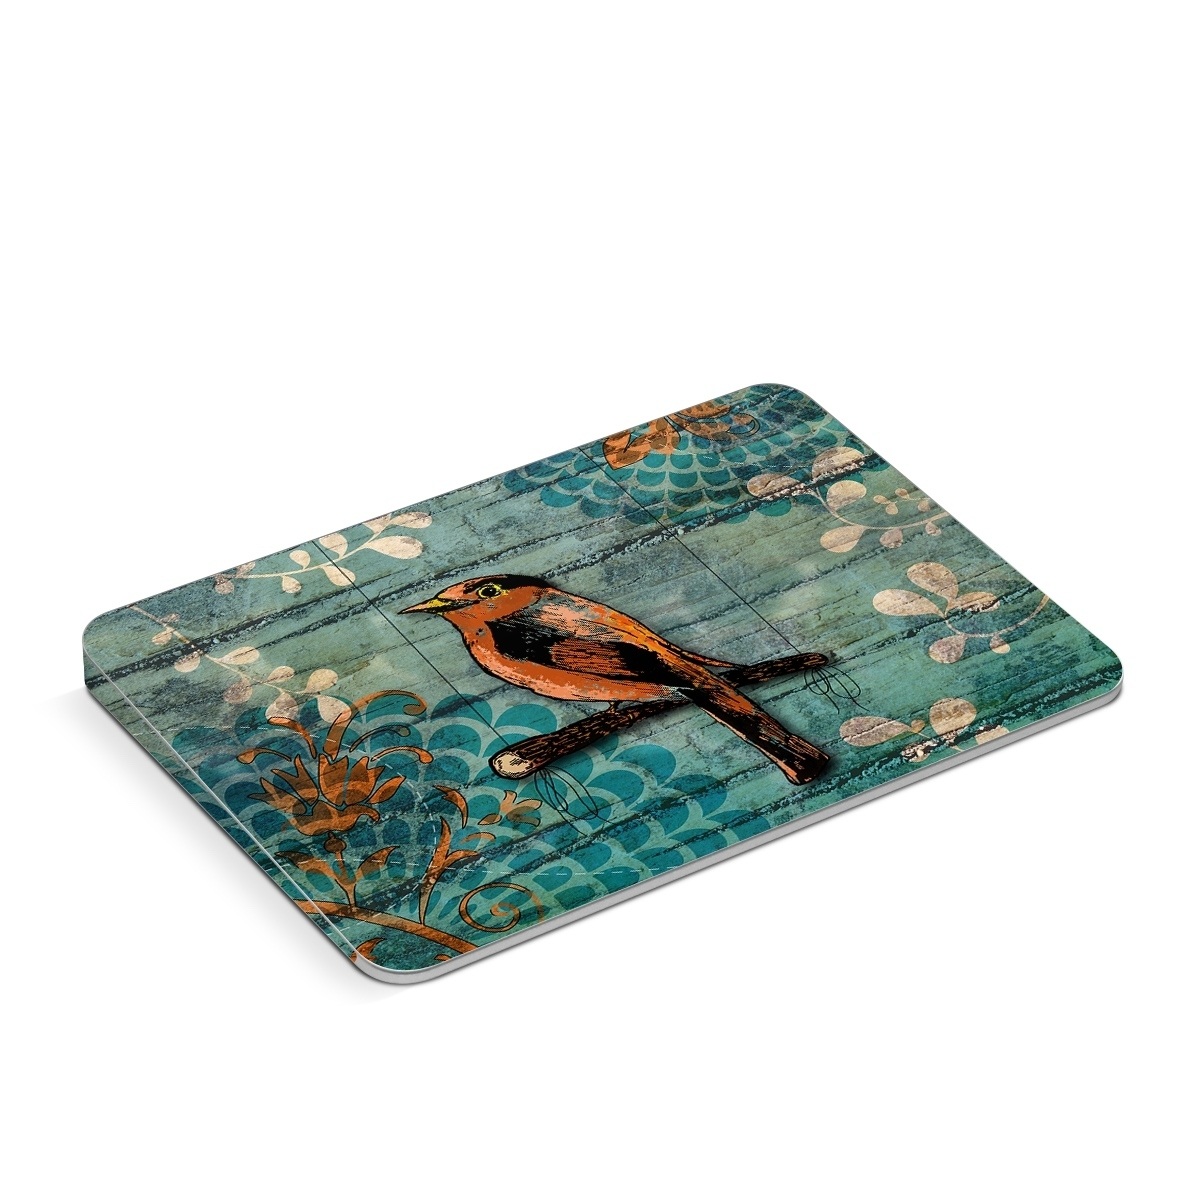 Apple Magic Trackpad Skin design of Bird, Turquoise, Painting, Art, Coraciiformes, Branch, Beak, Wildlife, Perching bird, Illustration, with black, blue, gray, green, red colors